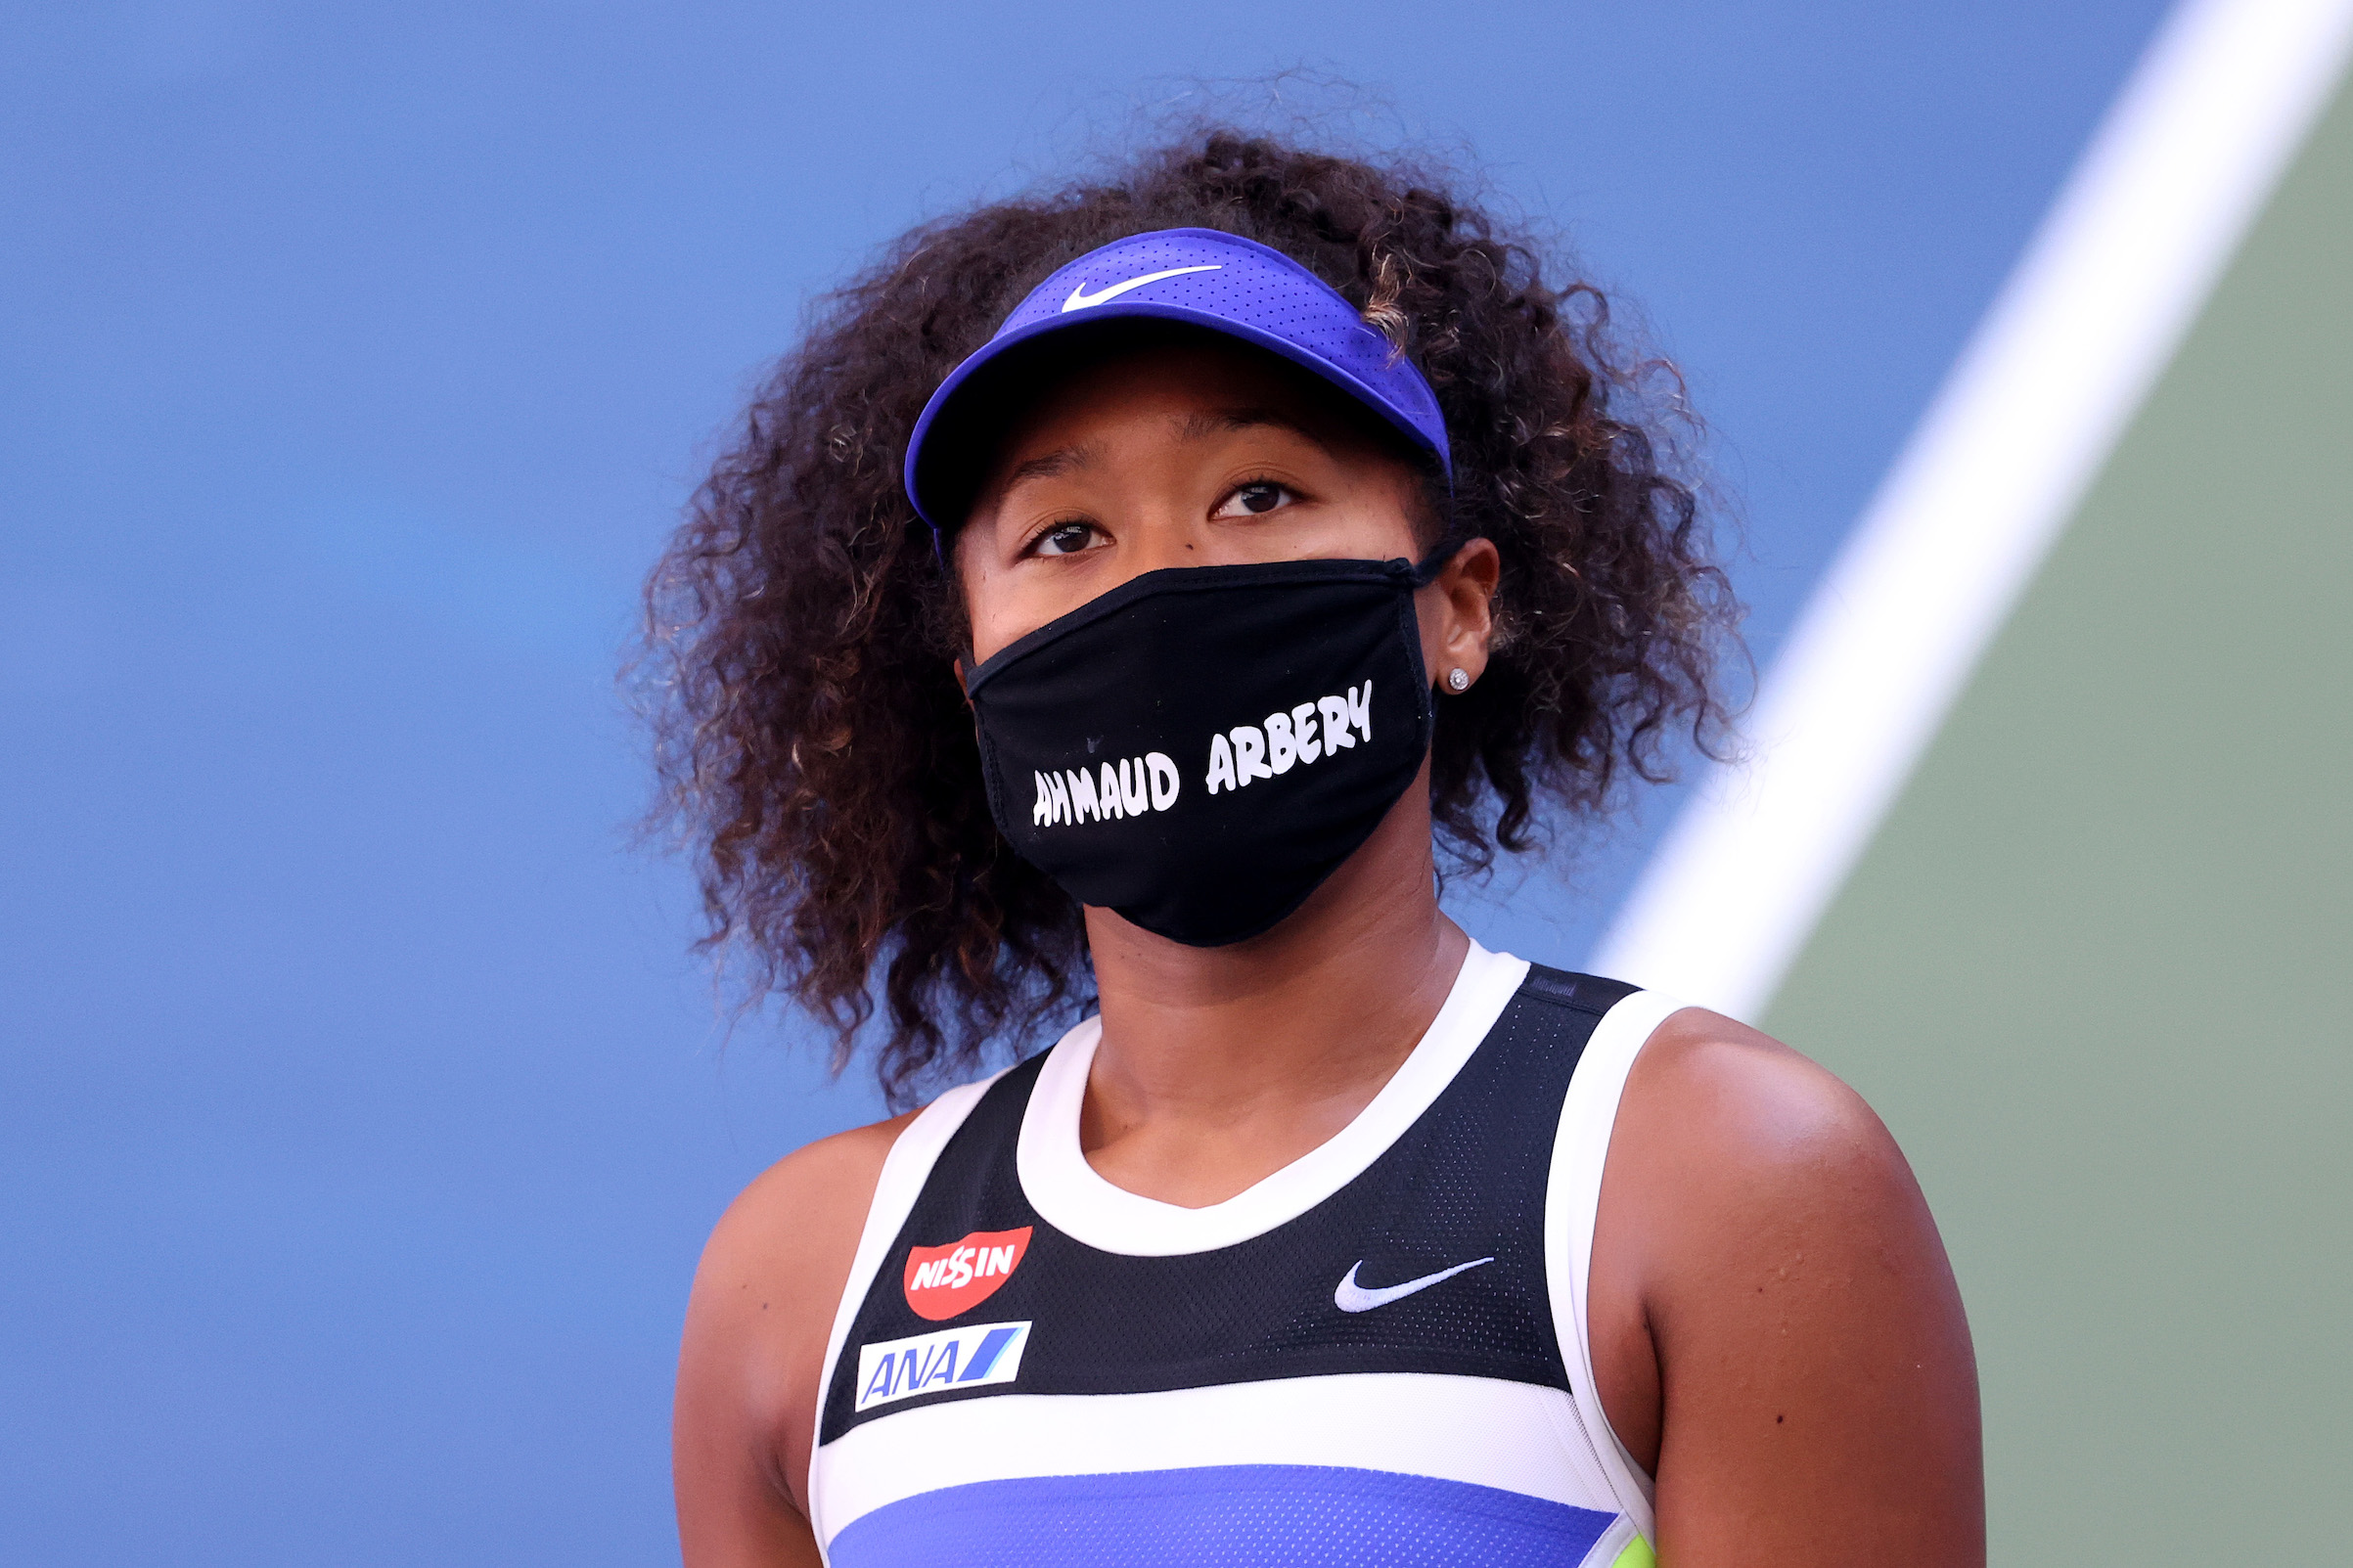 Naomi Osaka of Japan wears a protective face mask with the name Ahmaud Arbery stenciled on it after winning her Women's Singles third round match on Day Five of the 2020 U.S. Open in New York City. (Al Bello—Getty Images)